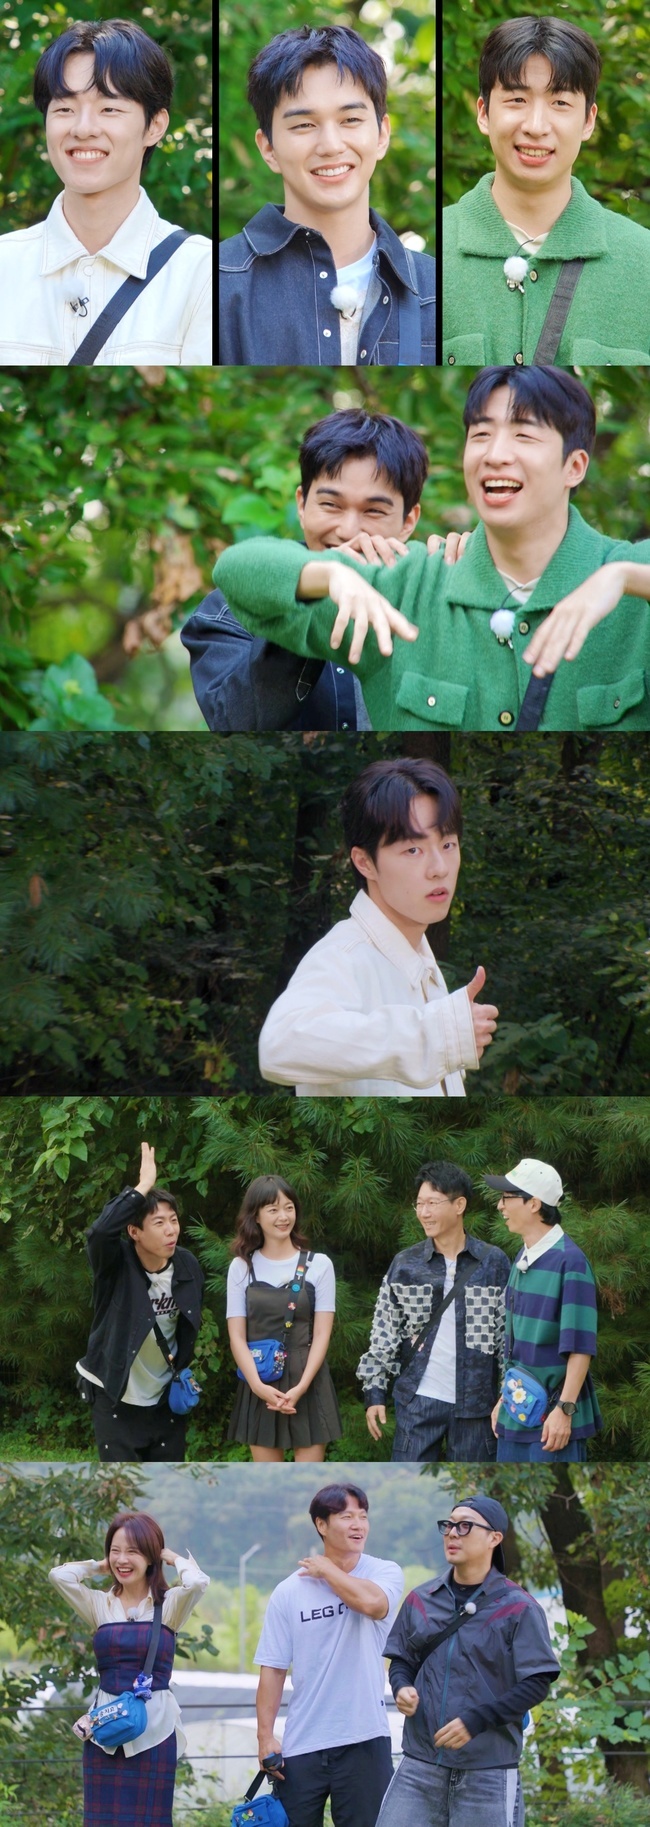 Actors Yoo Seung-ho, Kim Dong-hui and Yoo Soo-bin scramble for Running ManOn October 8, SBS  ⁇  Running Man ⁇  will release the hidden entertainment selves of  ⁇ entertainment shoot bud ⁇  Yoo Seung-ho, Kim Dong-hui, and Yoo Soo-bin. ⁇  Entertainment shoot bud  ⁇  The three people opened a spectacular opening ceremony from the opening.Kim Dong-hui, a former dance club member, drew attention by preparing the recently popular Dunesmoke Challenge, but as the performance continued, the public opinion of the Dunesmoke Dance Shindong  ⁇   ⁇   ⁇   ⁇   ⁇   ⁇   ⁇  gave a big smile.Yoo Soo-bin also summoned Kwangsoo as a vocal simulation, boasting a 200% synchro rate, and being recognized as a member of the  ⁇ Kwangsoo Bin.In particular, Yoo Seung-ho showed shyness in his first entertainment appearance in his debut 25 years, but he showed off his impudence with a virtuous expression, saying that he would show it properly, and Yoo Seung-hos reversal charm, It is the back door that the character is the first time in his life, and he was surprised that he was surprised.